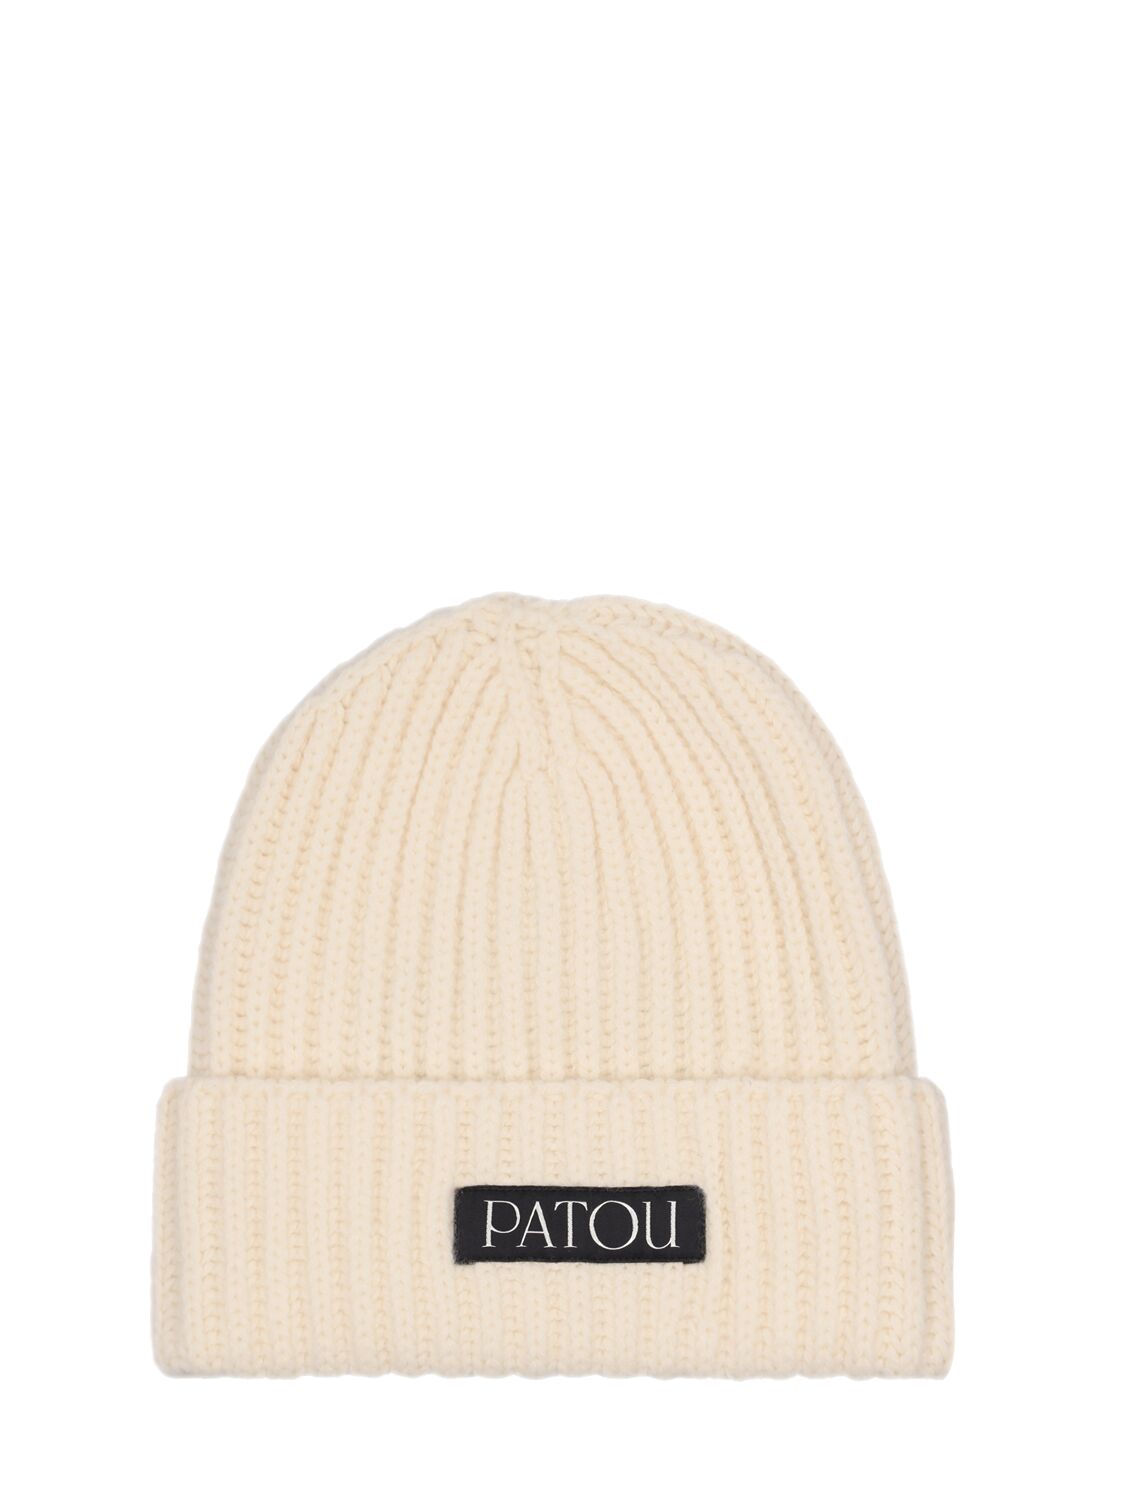 Patou Ribbed Wool & Cashmere Beanie Hat In Neutral